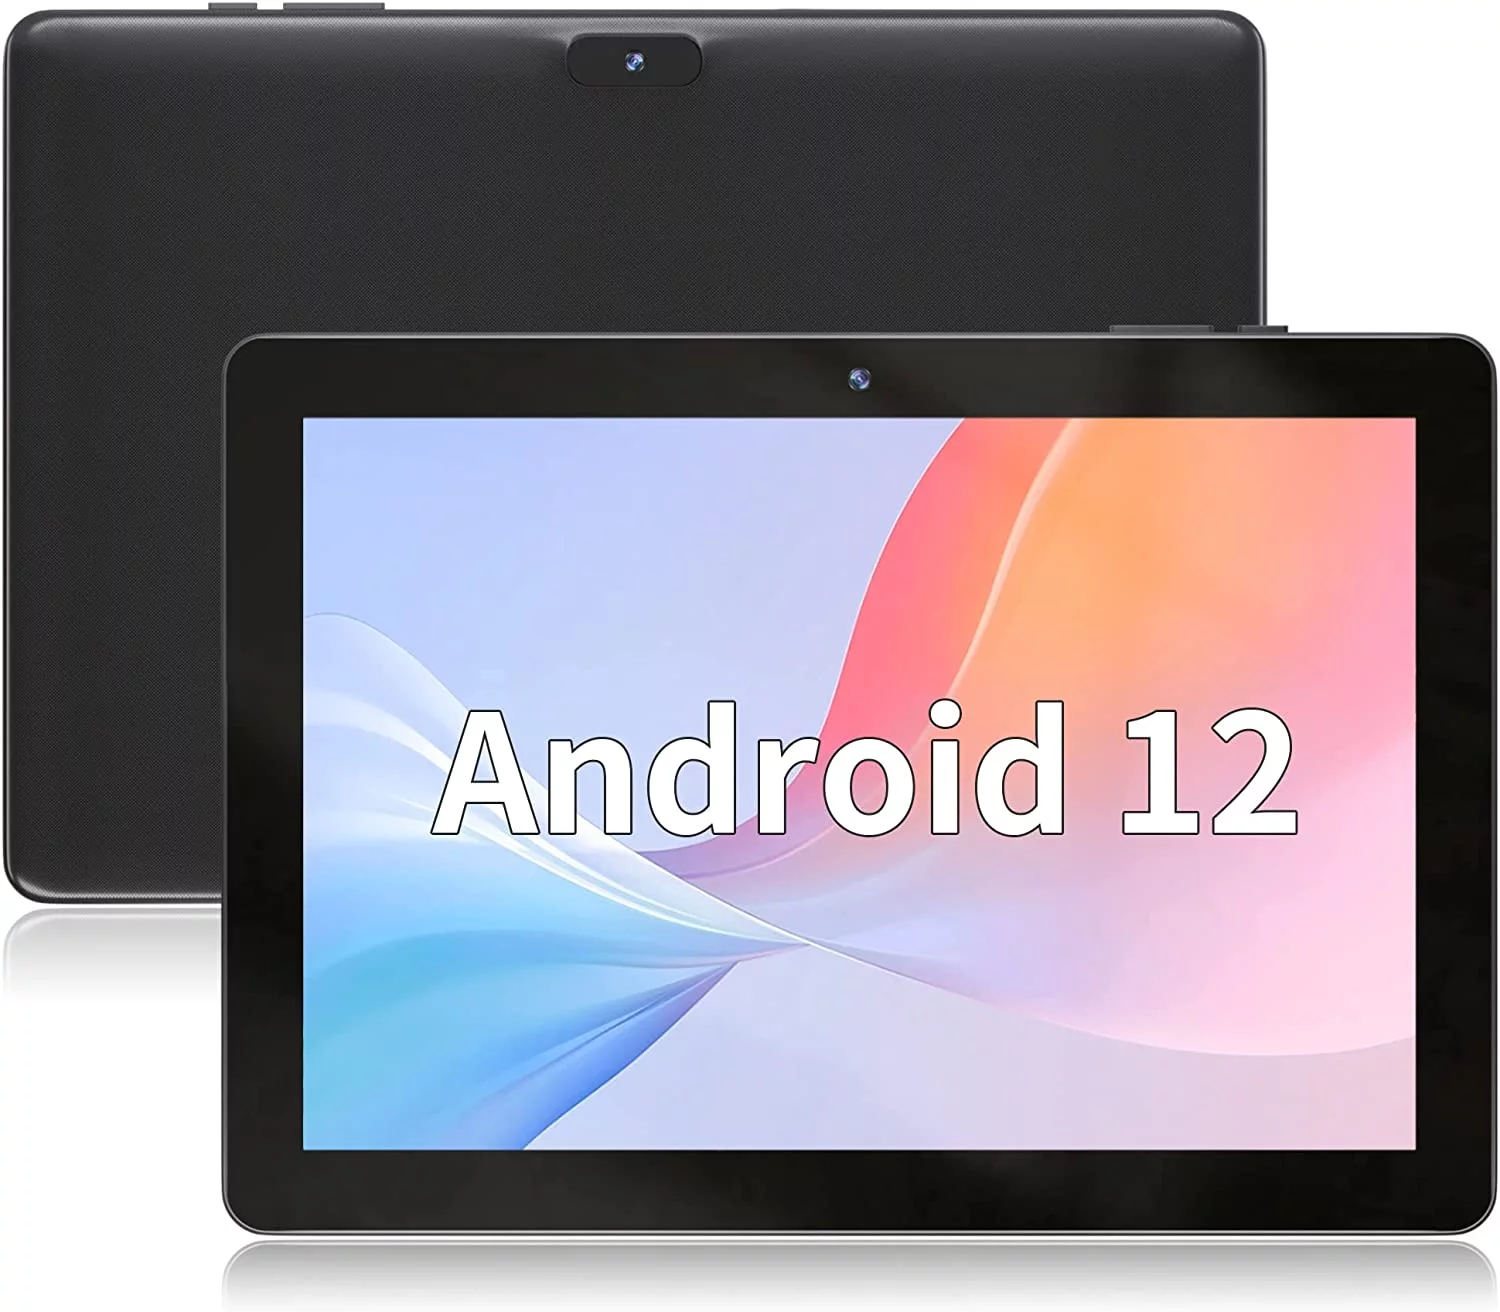 SGIN 10 inch Android 12 Tablet 2GB RAM 32GB ROM Tab 800 x 1280 HD IPS Tablet with up to 1.6 Ghz 4 Core Processor Bluetooth 4.2 Wifi 2MP+5MP Camera, 512GB Expandable